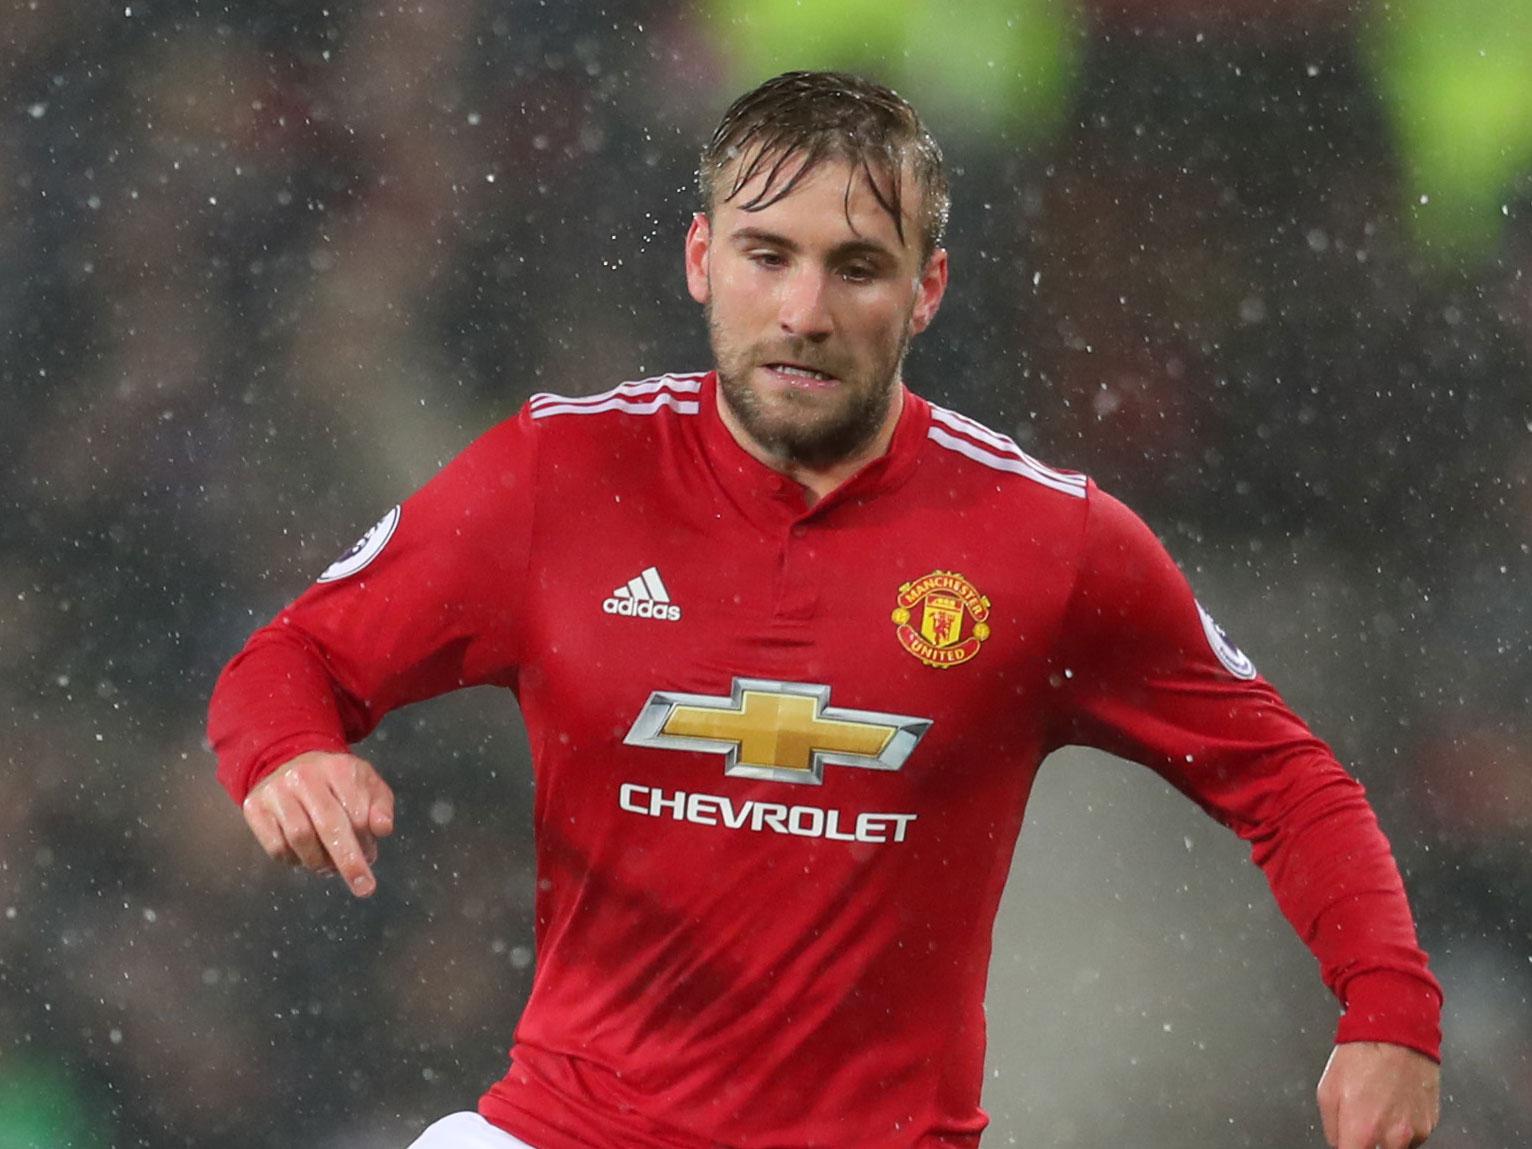 Shaw has managed to persuade Mourinho he is worth a new contract